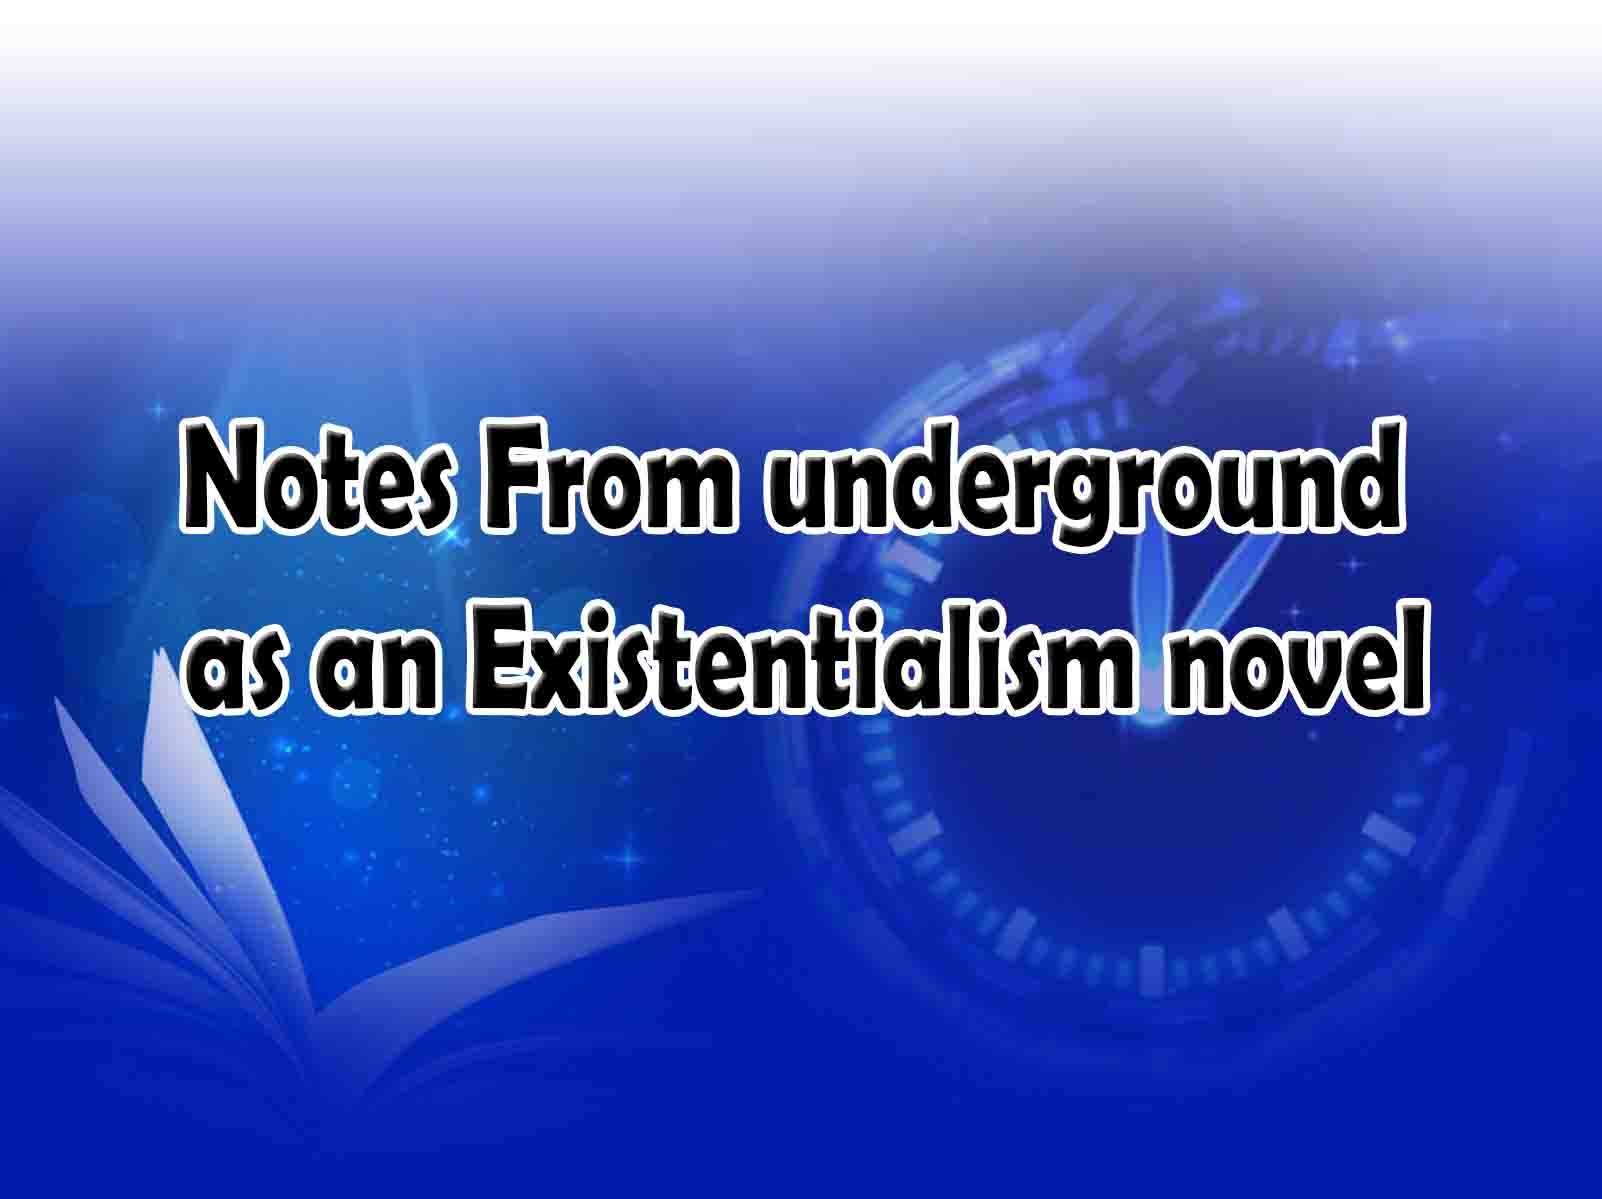 Notes From underground as an Existentialism novel